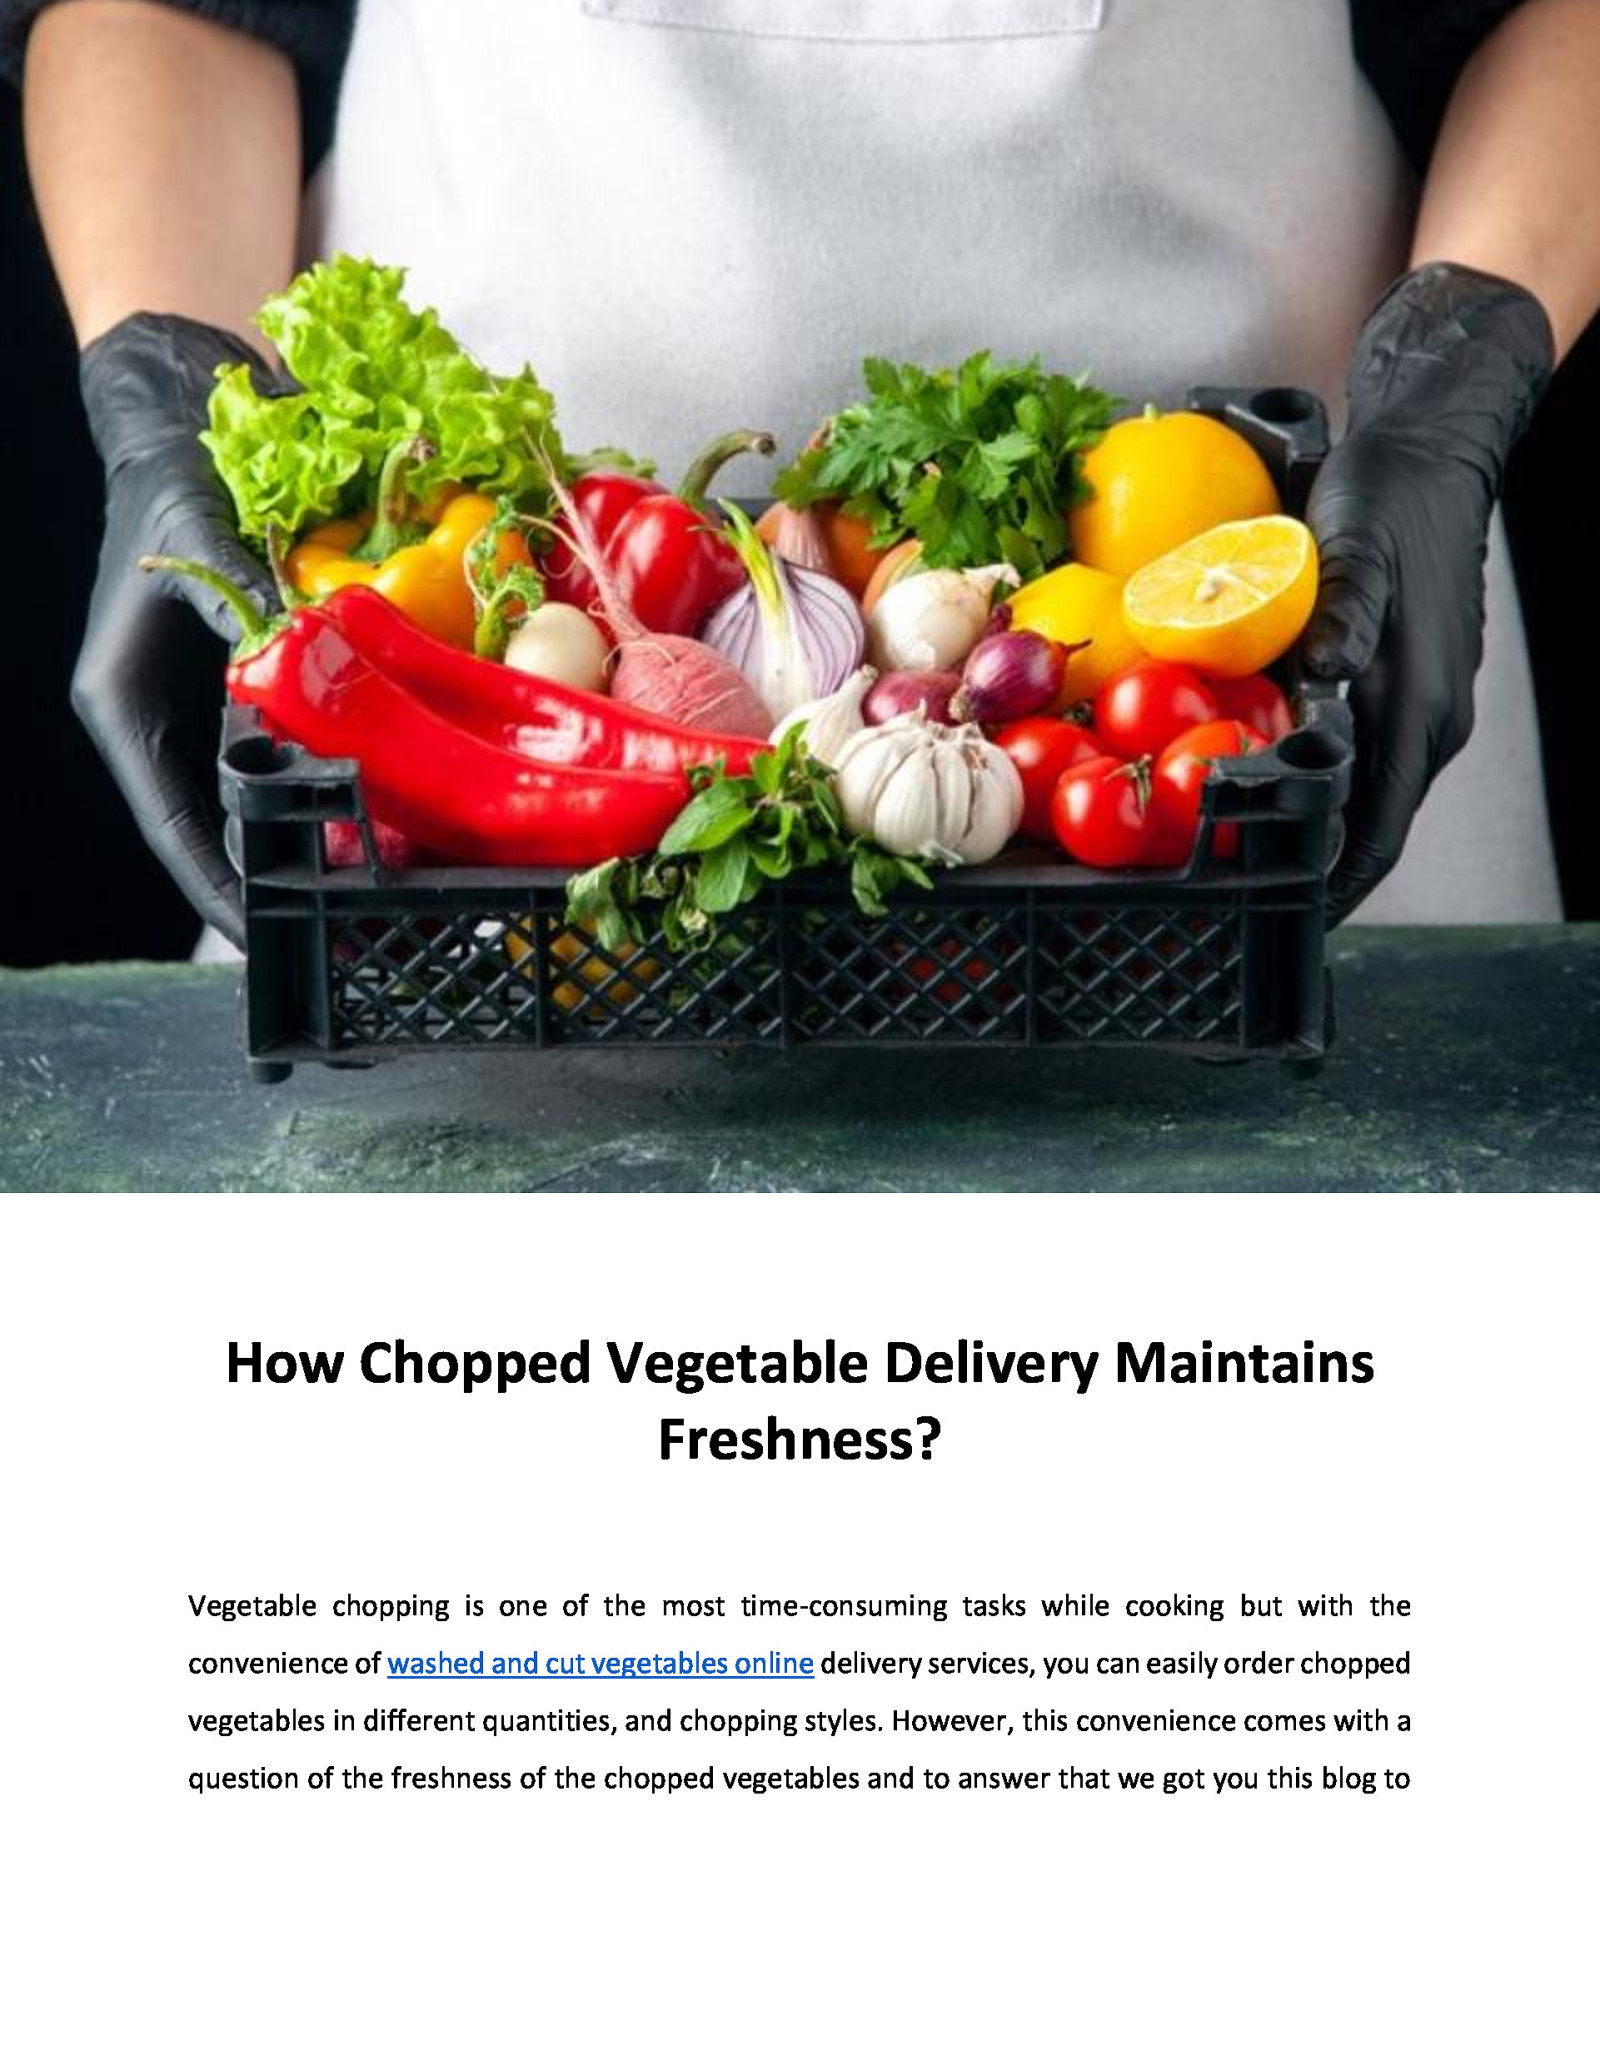 How Chopped Vegetable Delivery Maintains Freshness?